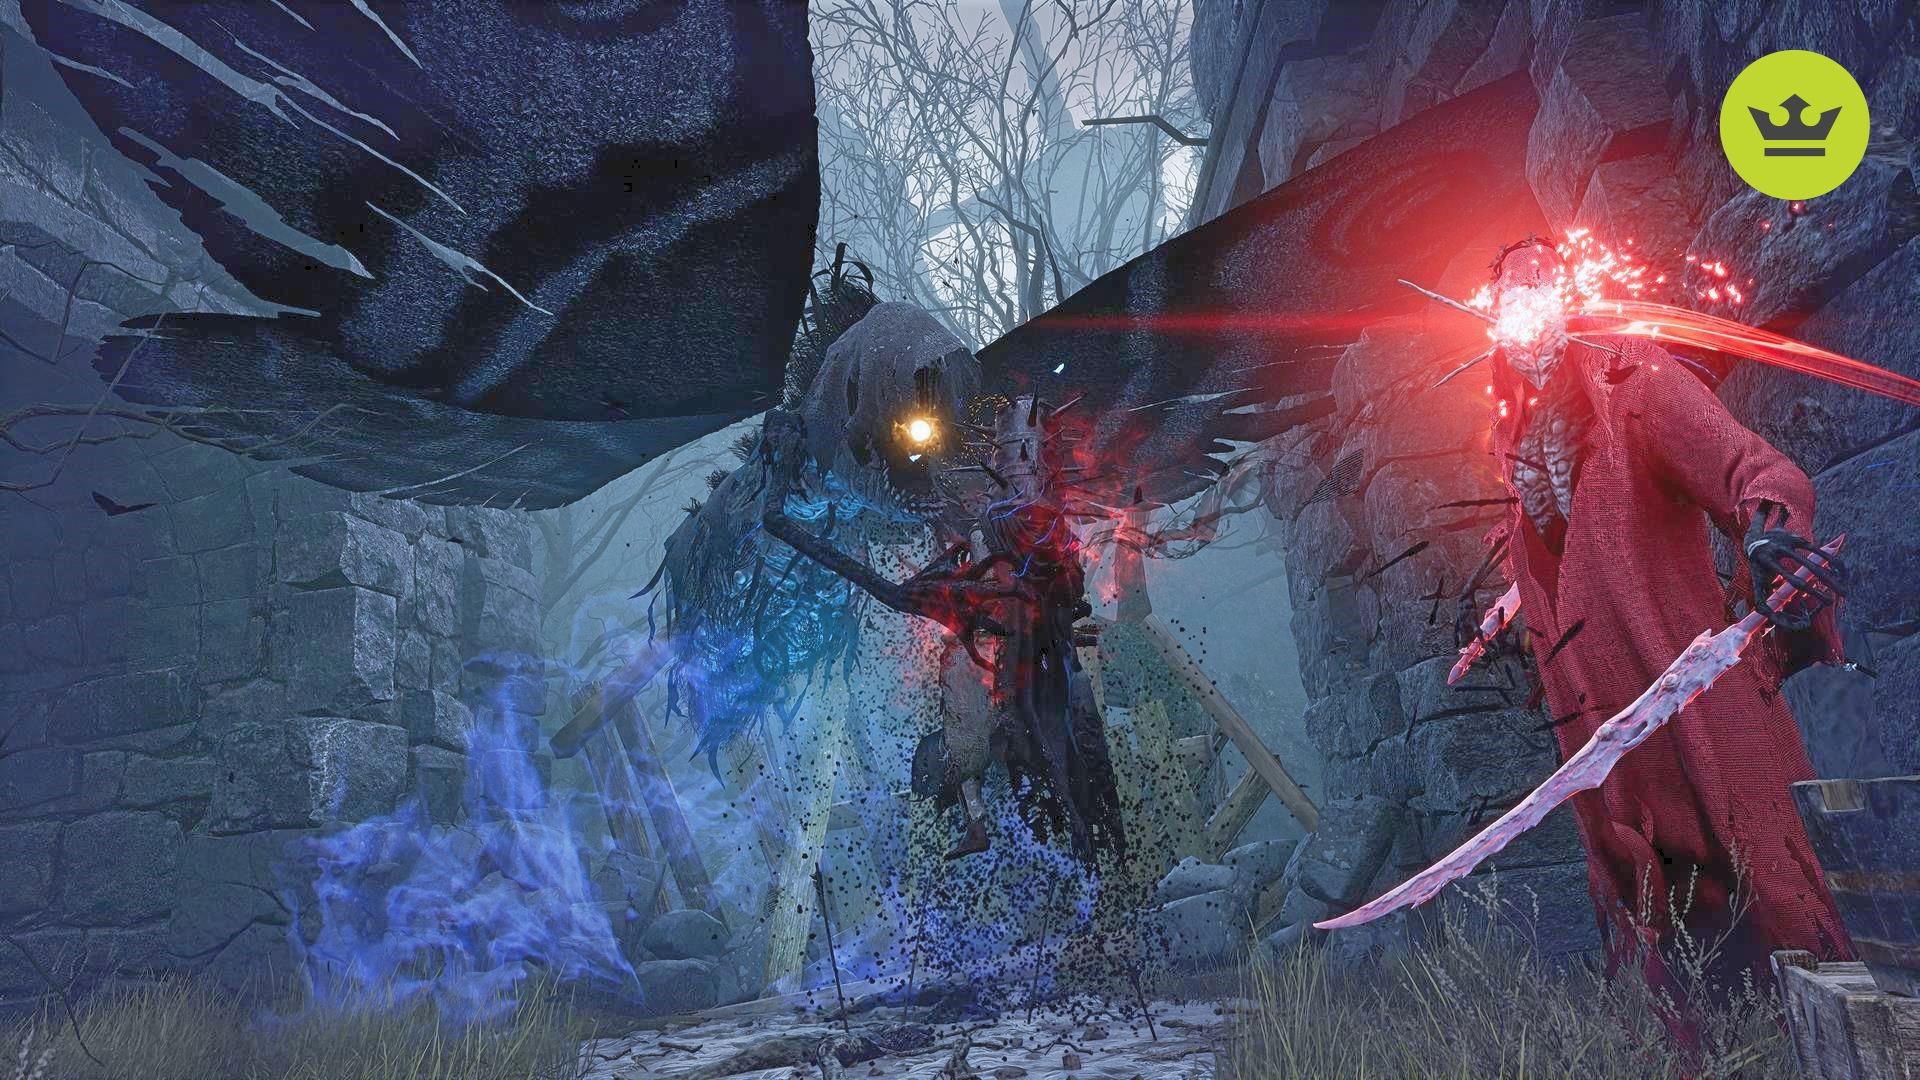 Lords of the Fallen review – faltering in its execution